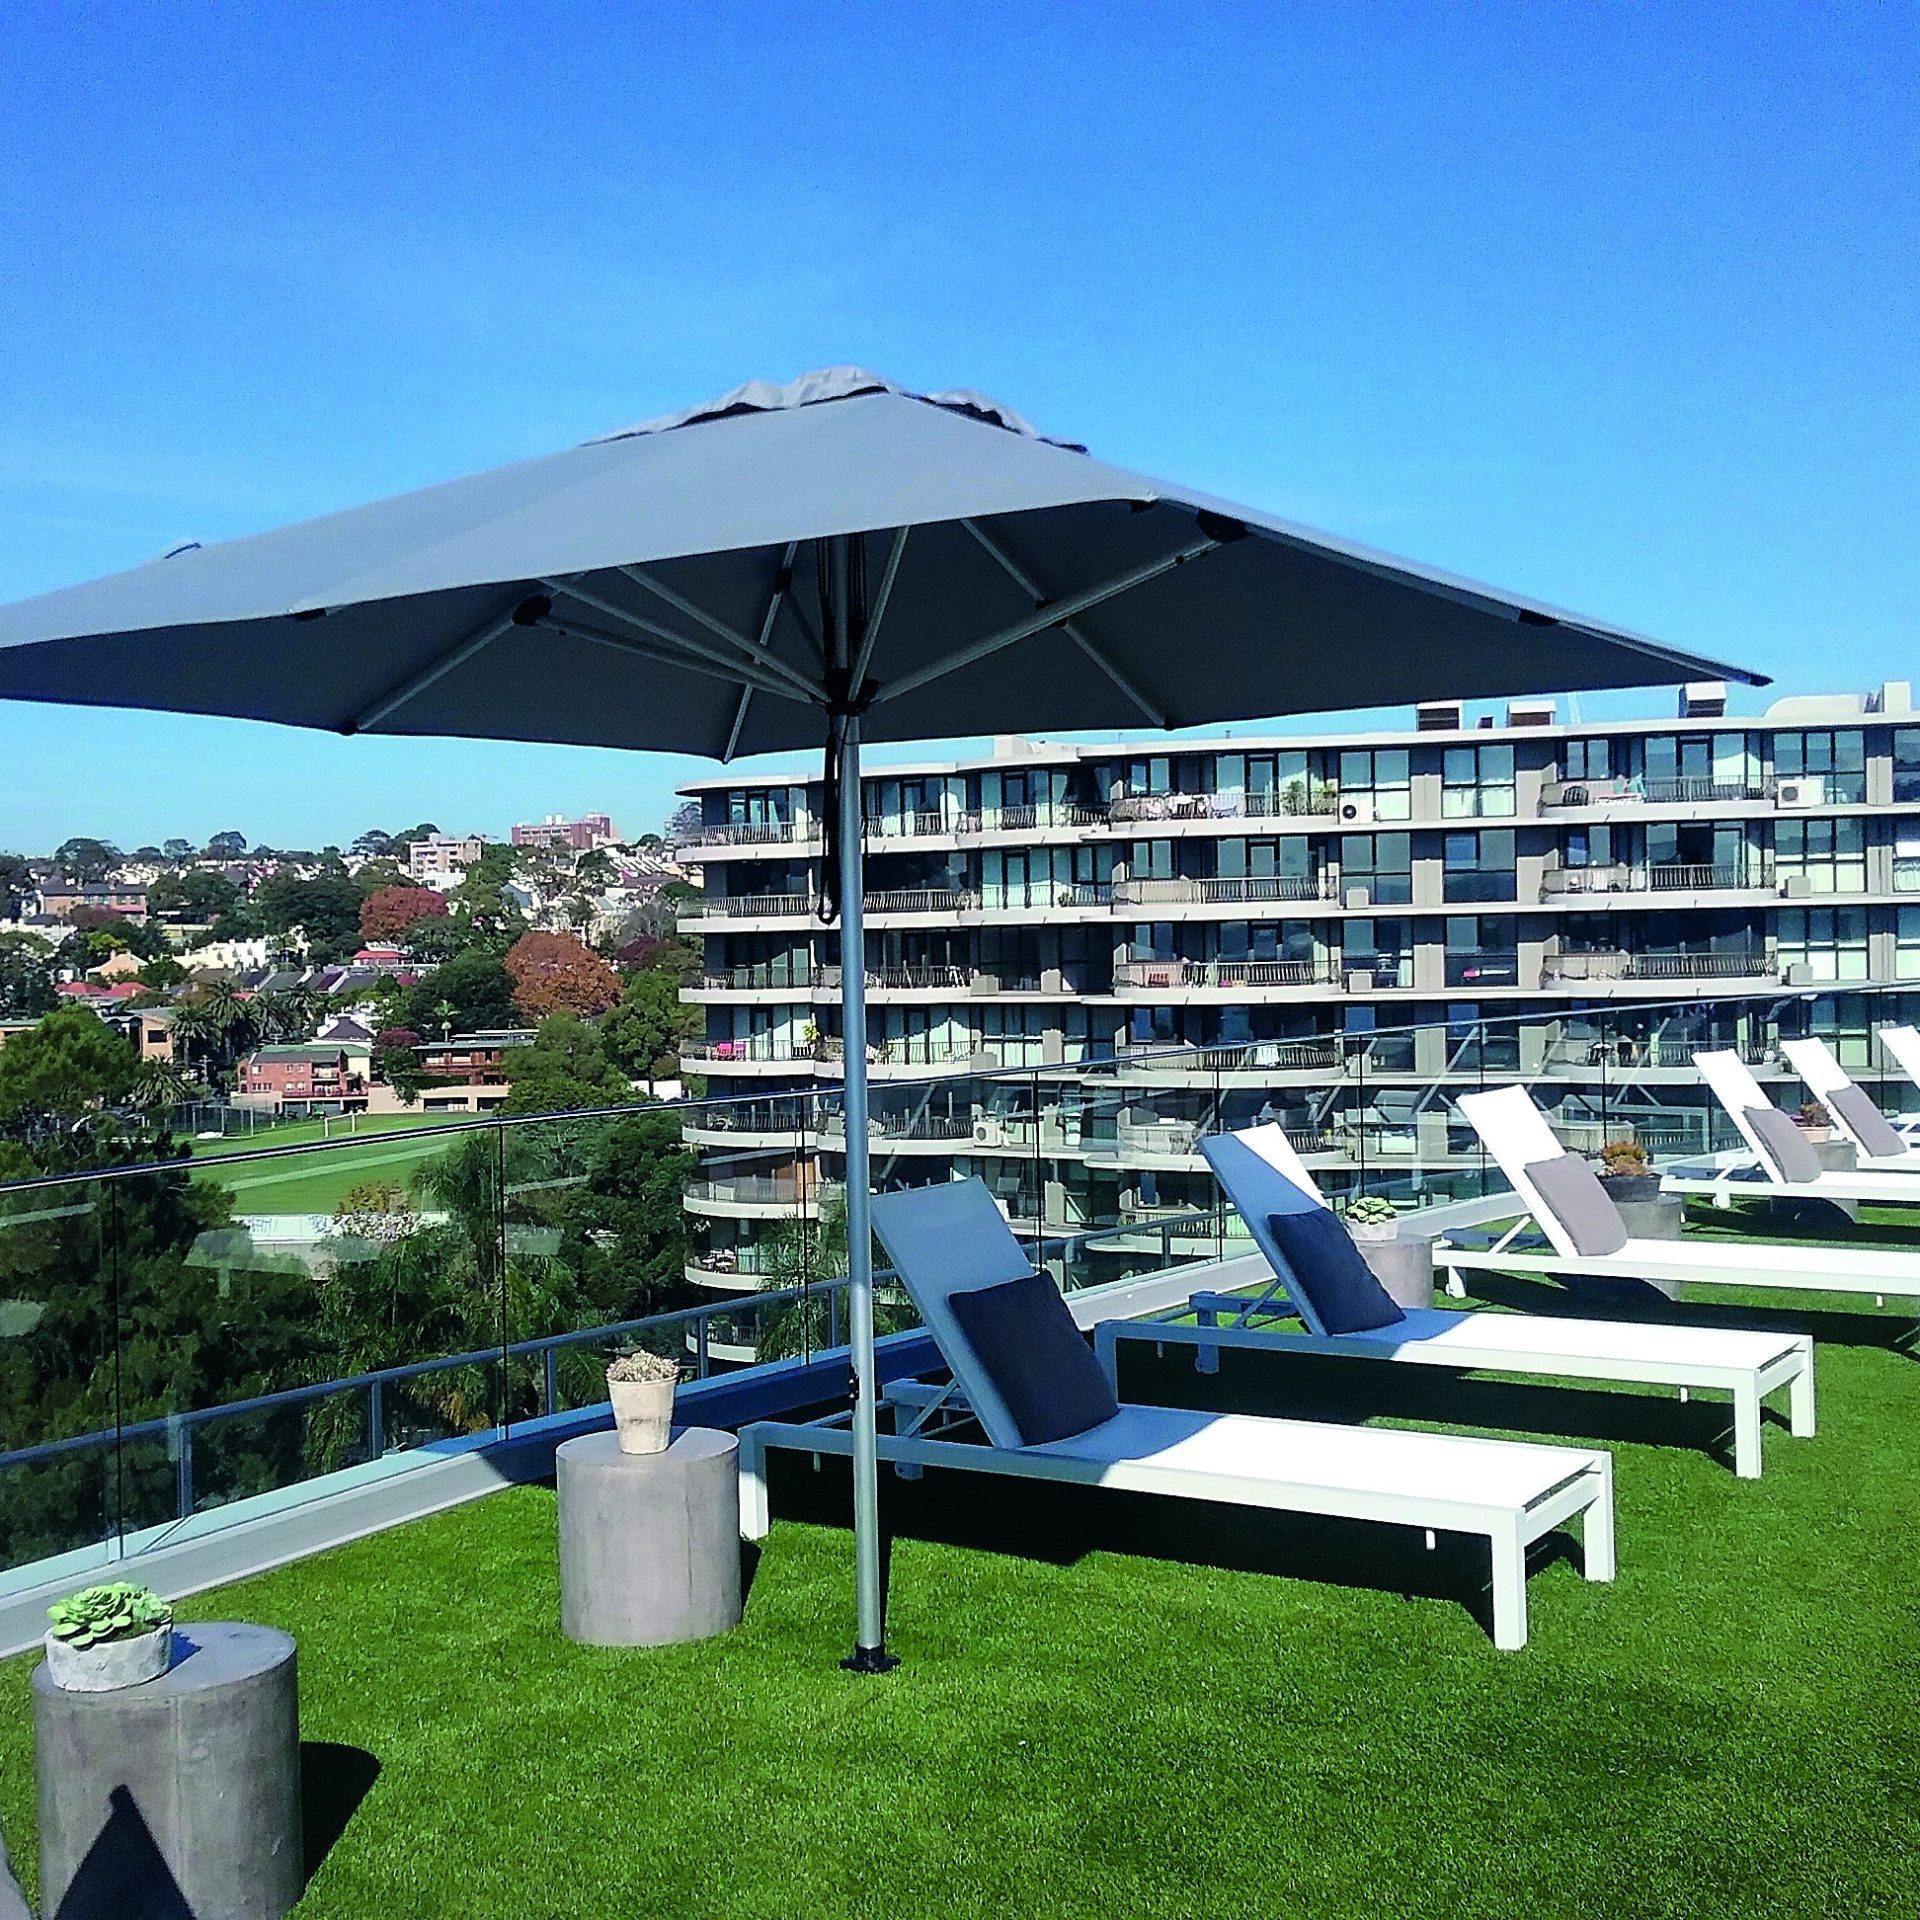 Square umbrella open on a roof top area with deck chairs